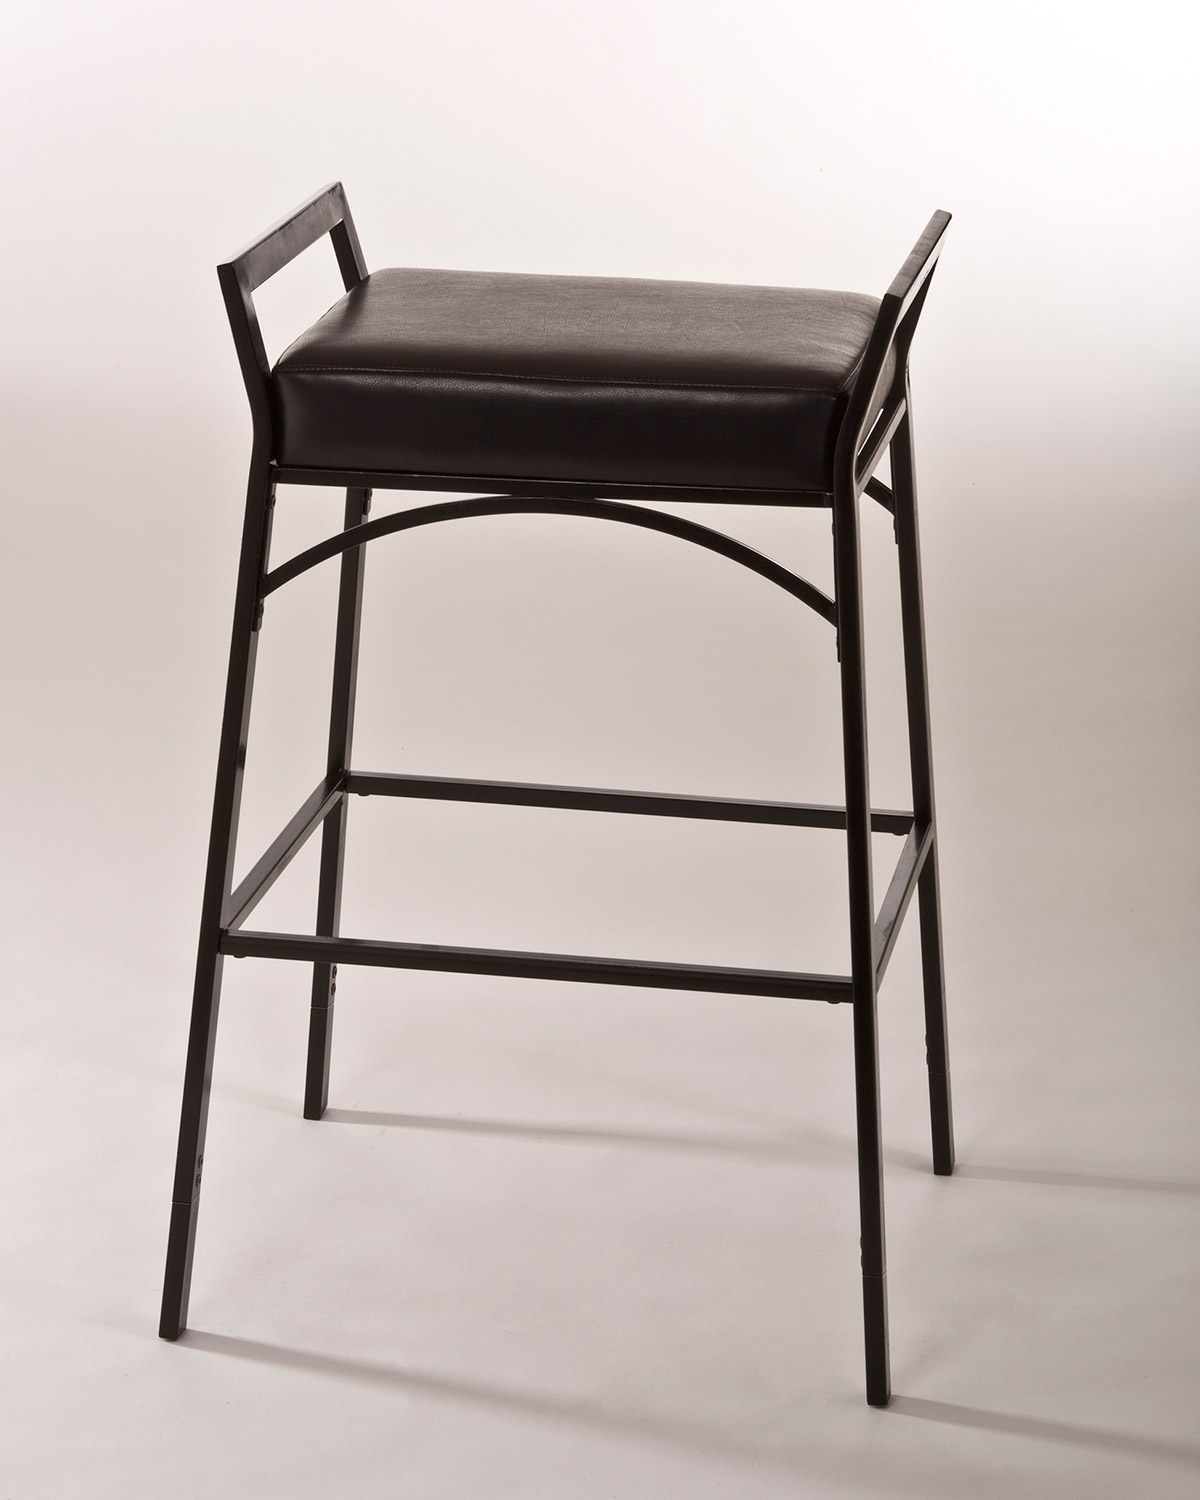 Hillsdale Hawthorne Backless Non-Swivel Counter/Bar Stool with nested leg - Black